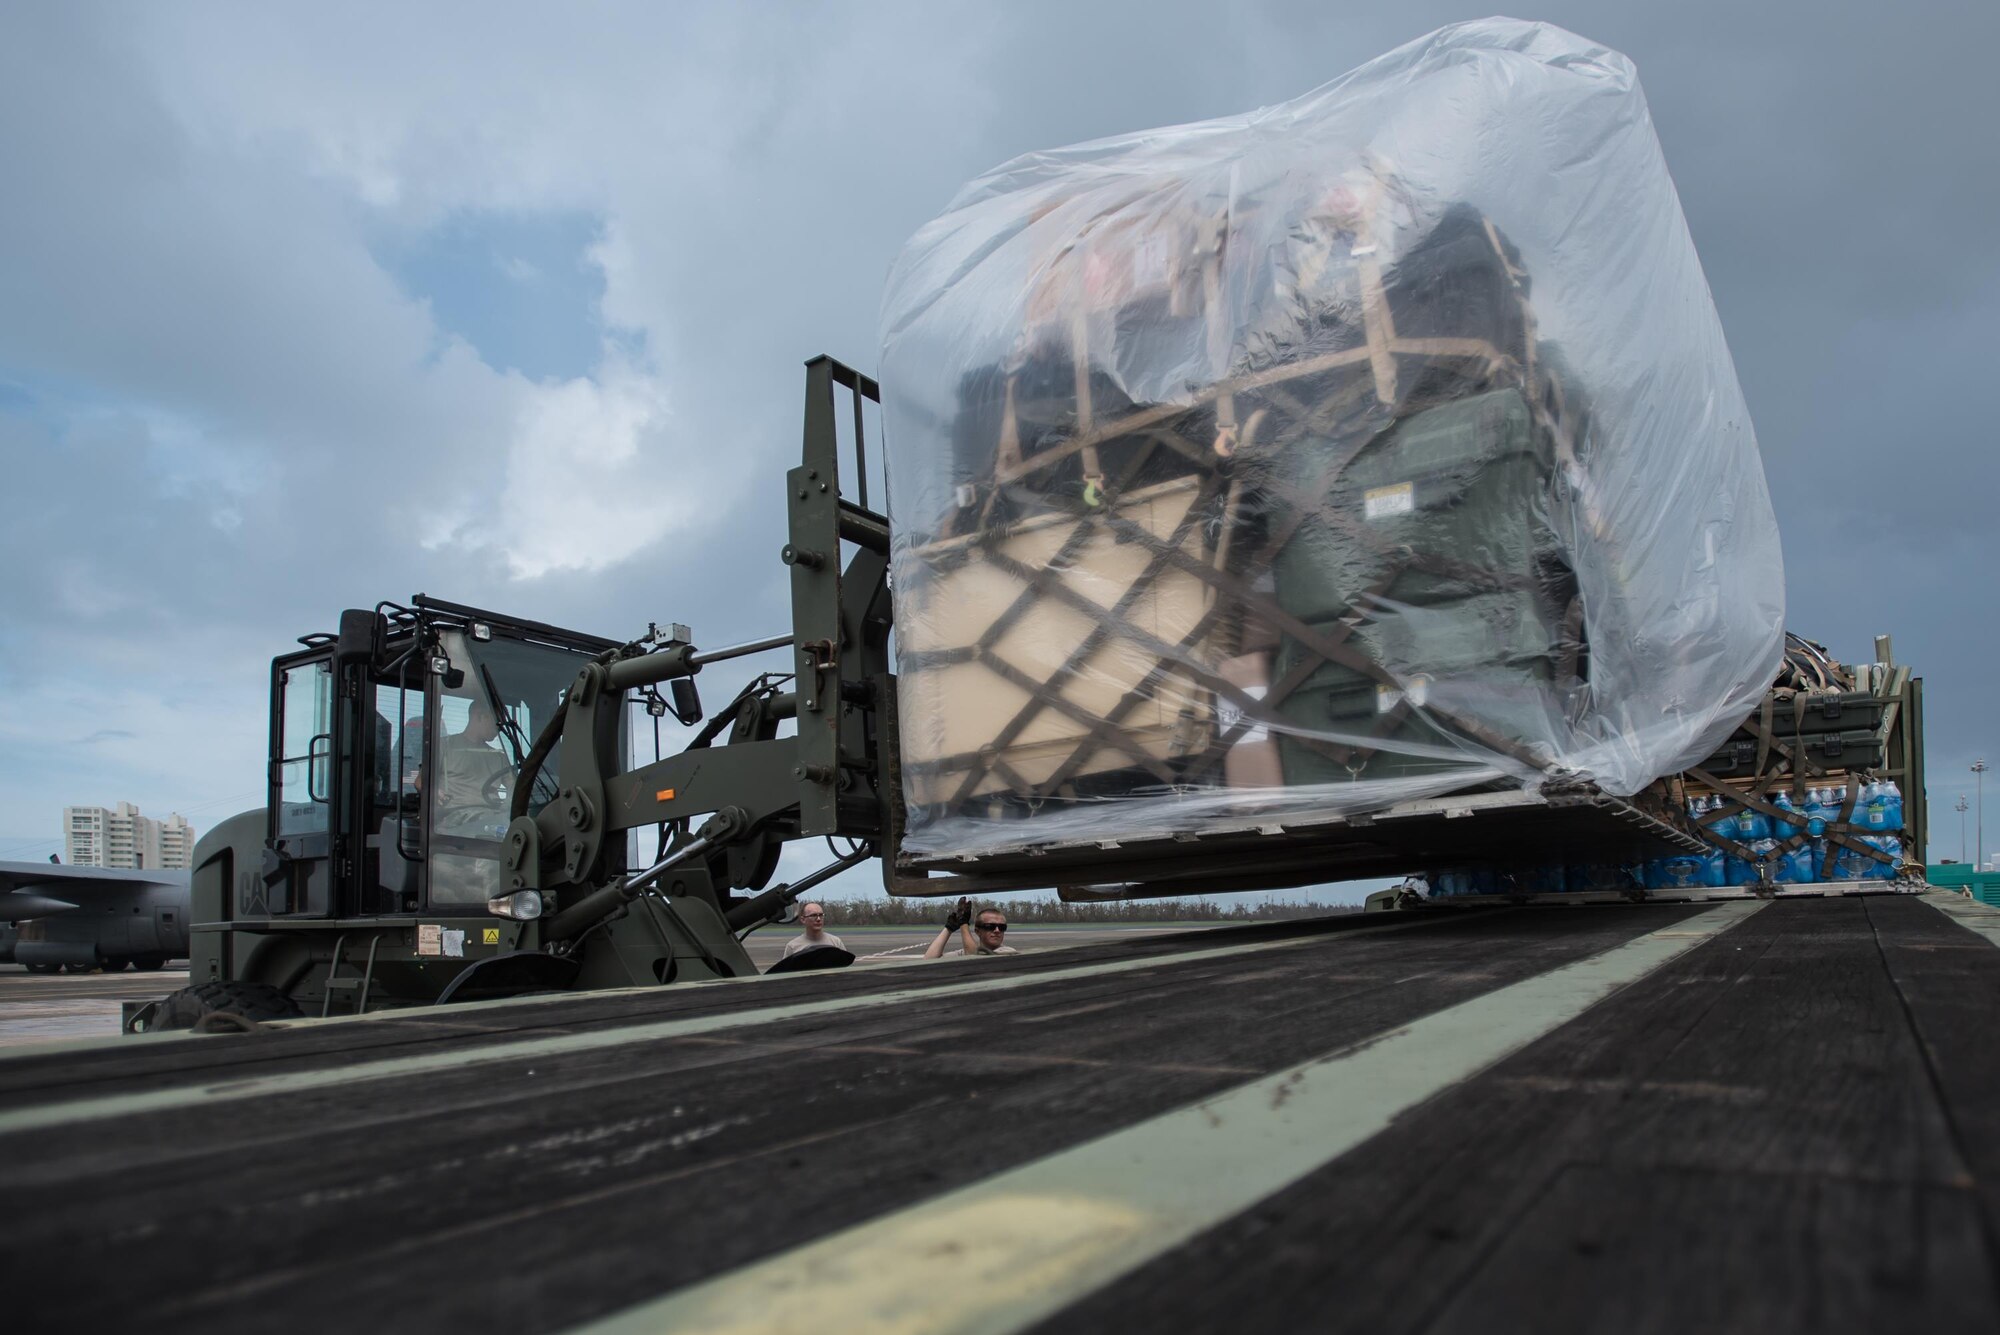 Airmen from the Kentucky Air National Guard’s 123rd Contingency Response Group, augmented by troops from the active-duty Air Force and Air National Guard units in multiple states, load relief supplies onto trucks for distribution at Luis Muñoz Marín International Airport in San Juan, Puerto Rico, in the wake of Hurricane Maria Oct. 7, 2017. The unit’s Airmen established an aerial port of debarkation upon arrival here Sept. 23, and have processed more than 7.2 million pounds of cargo and humanitarian aid for distribution in the first three weeks of the operation. (U.S. Air National Guard photo by Lt. Col. Dale Greer)